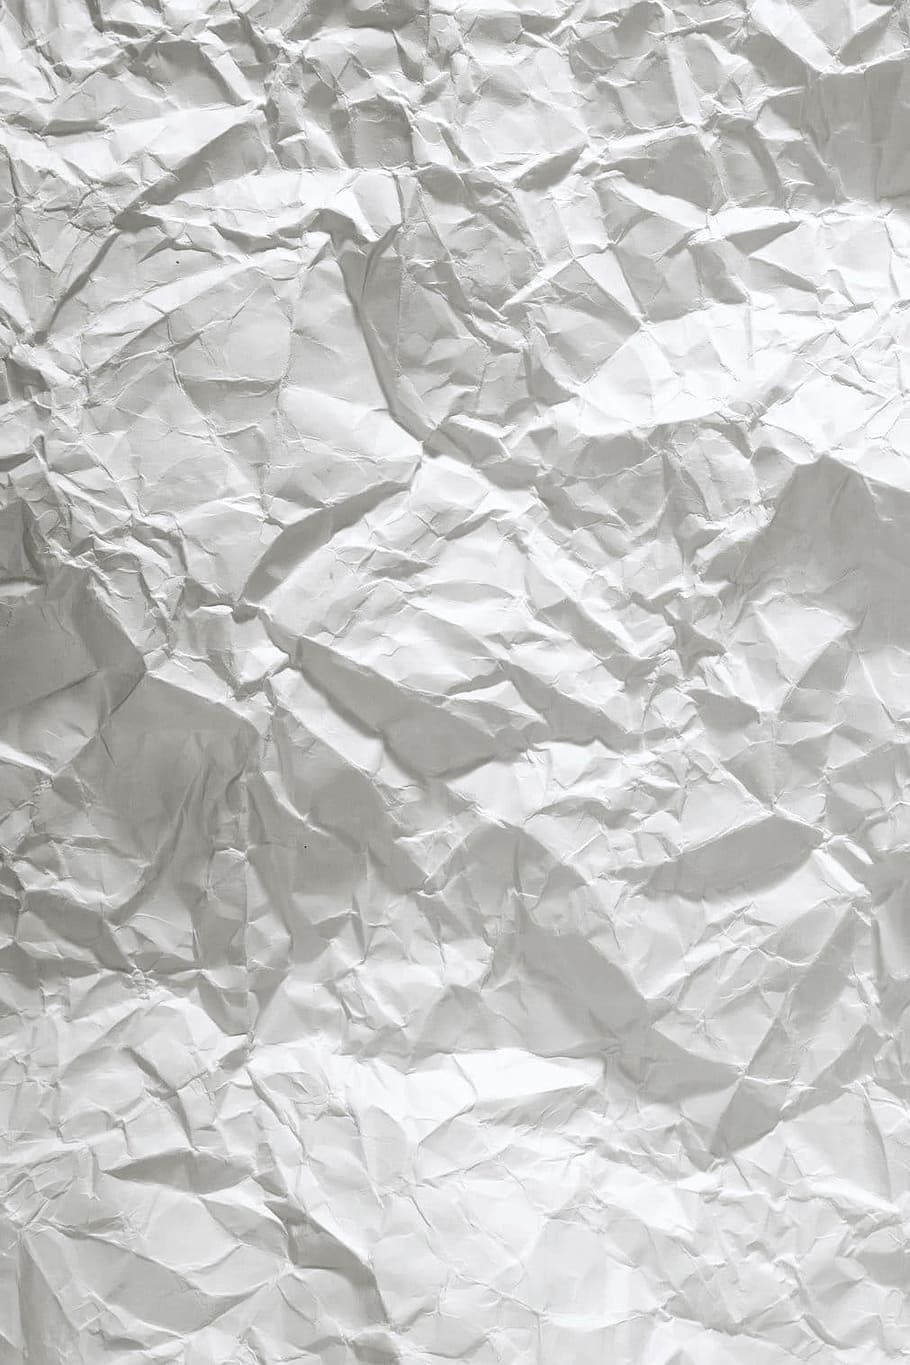 Download Close-up View of Wrinkled Paper Texture Wallpaper | Wallpapers.com